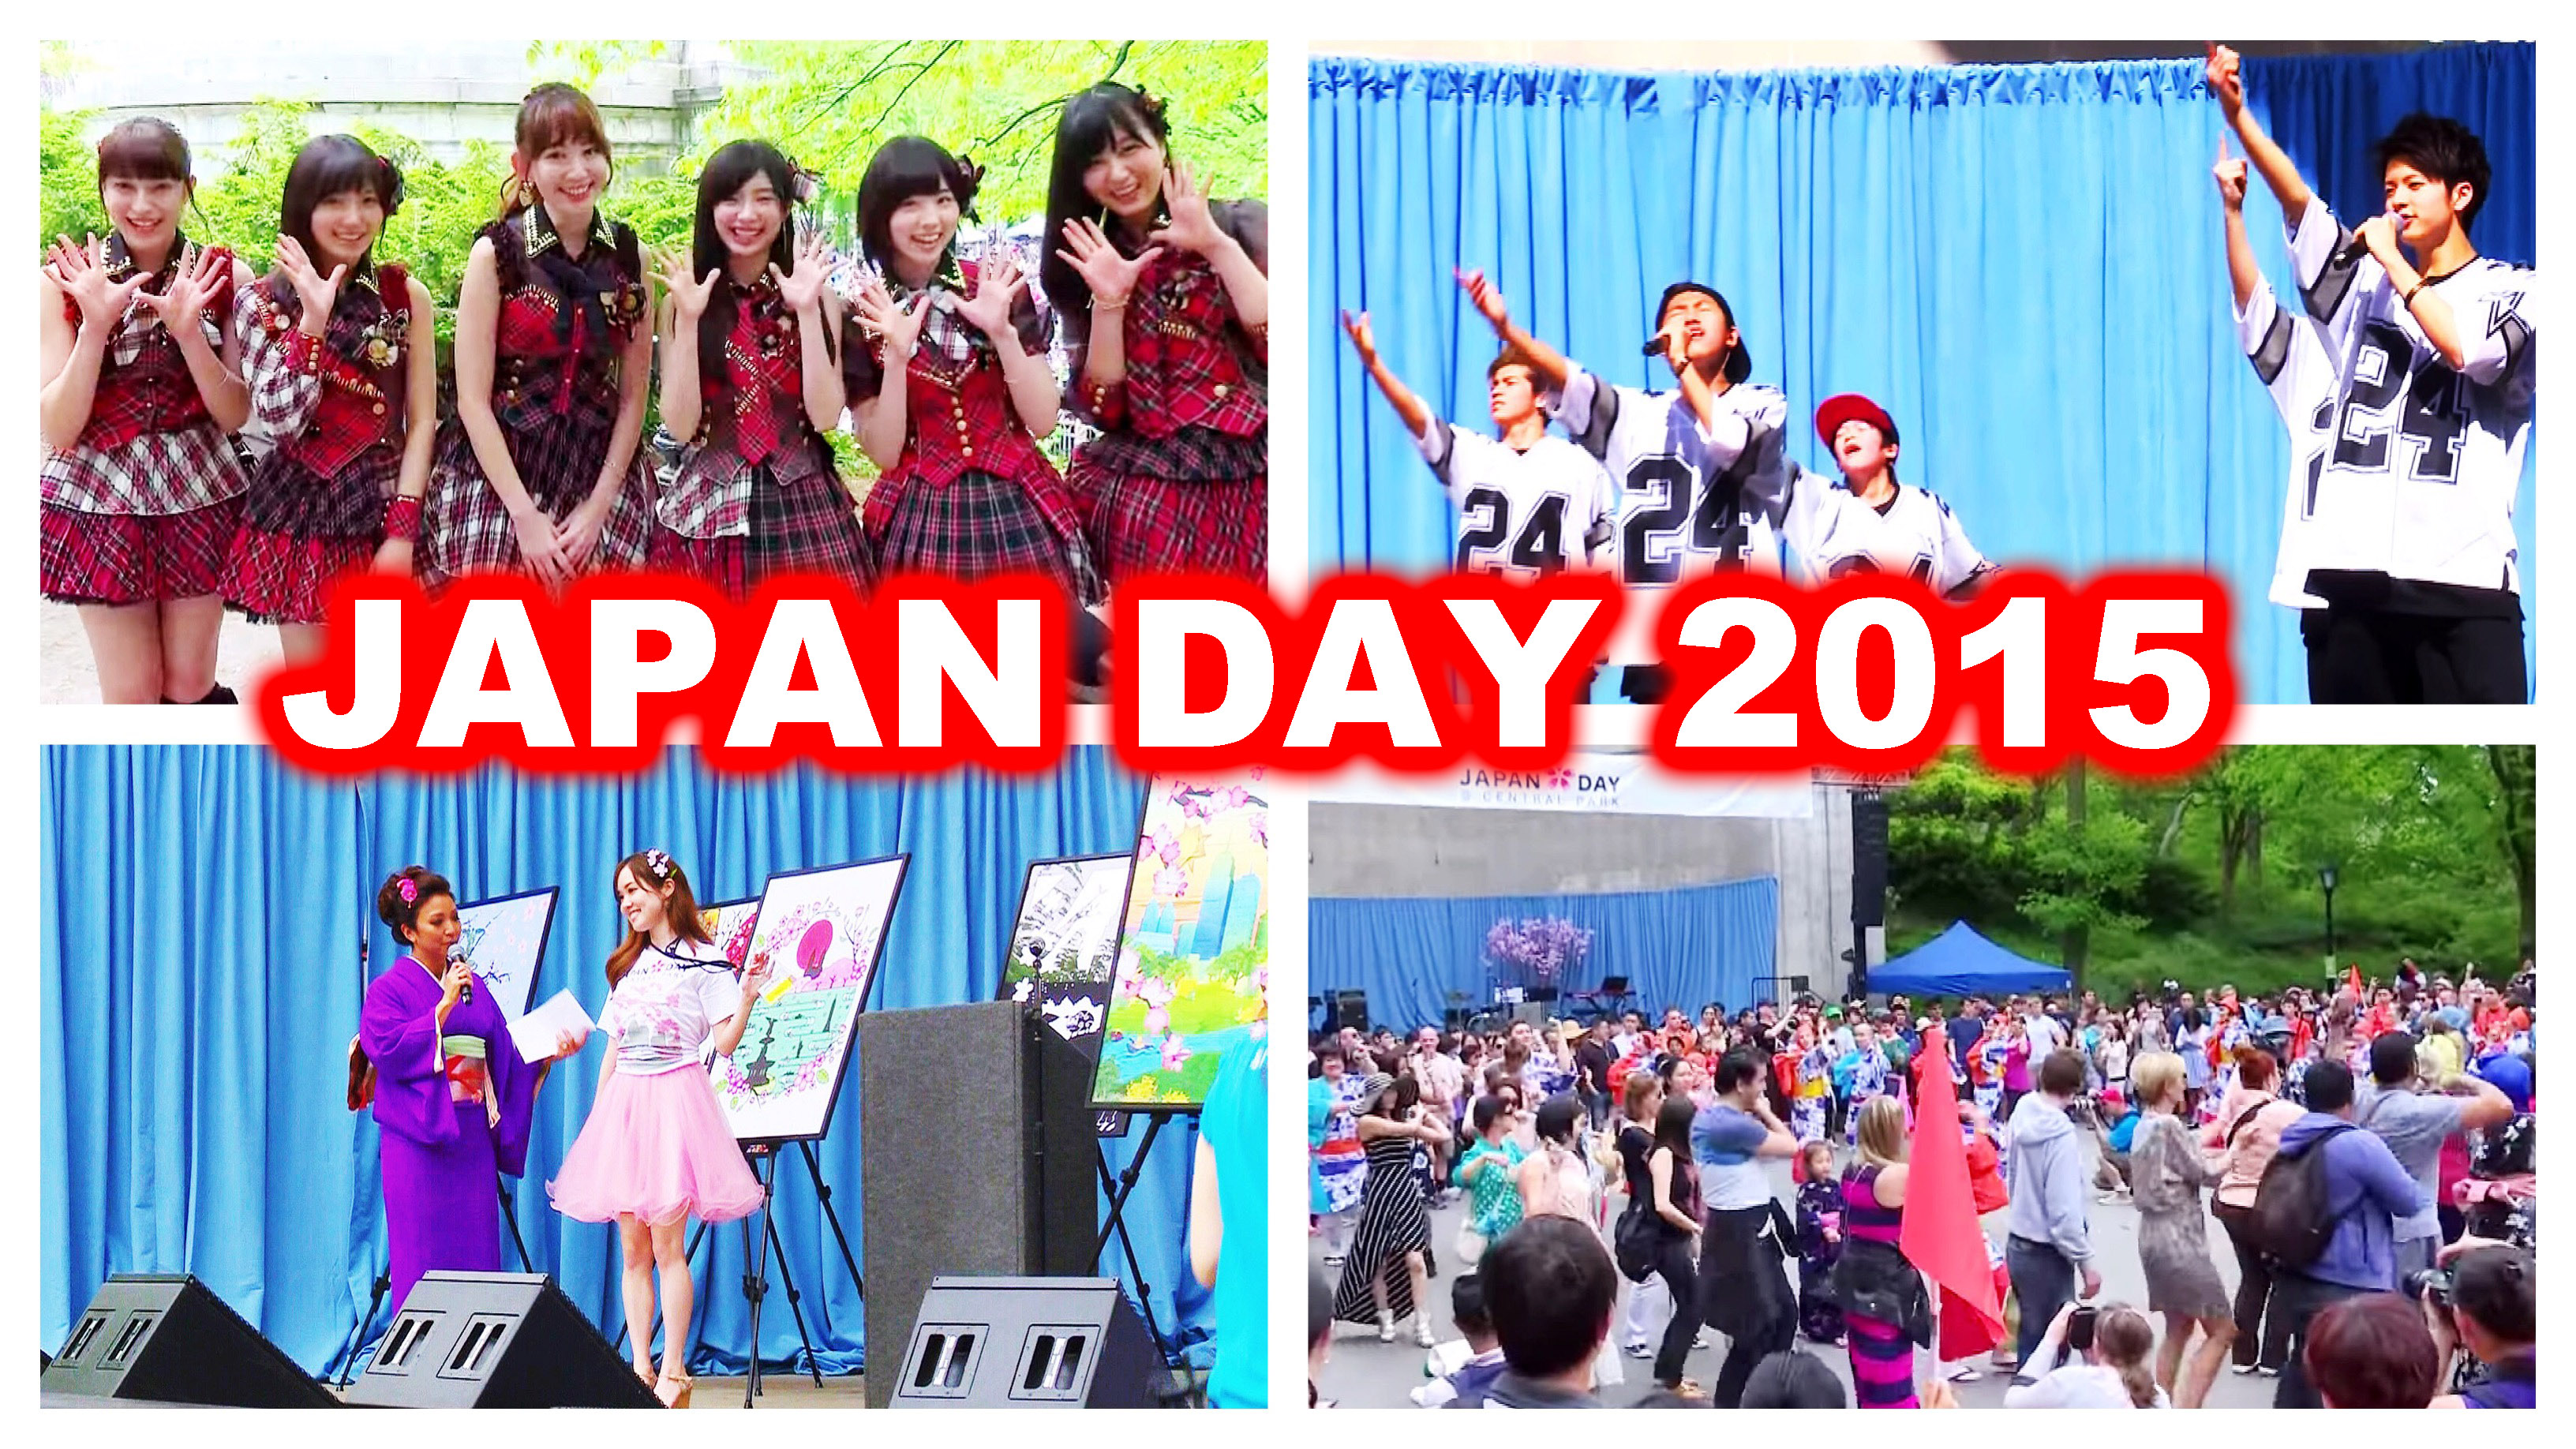 AKB48も参加！日本のお祭り in NY、Japan Day 2015が開催！/ JAPAN DAY 2015!! AKB48 in NY, Stage Performances, & Japanese Culture (Eng subs)